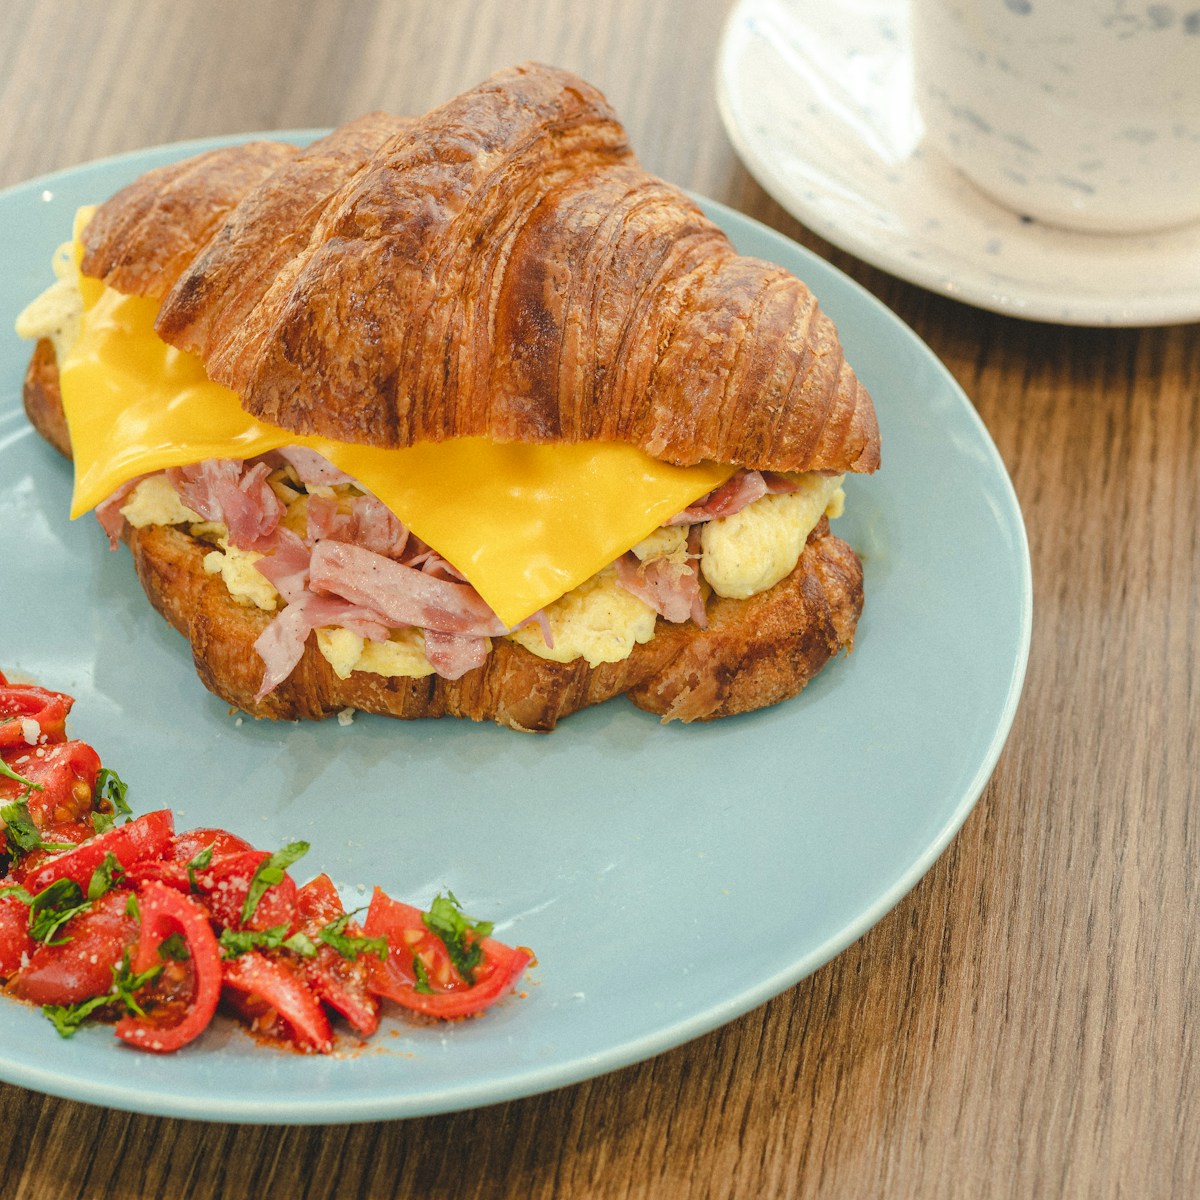 a croissant sandwich is on a blue plate